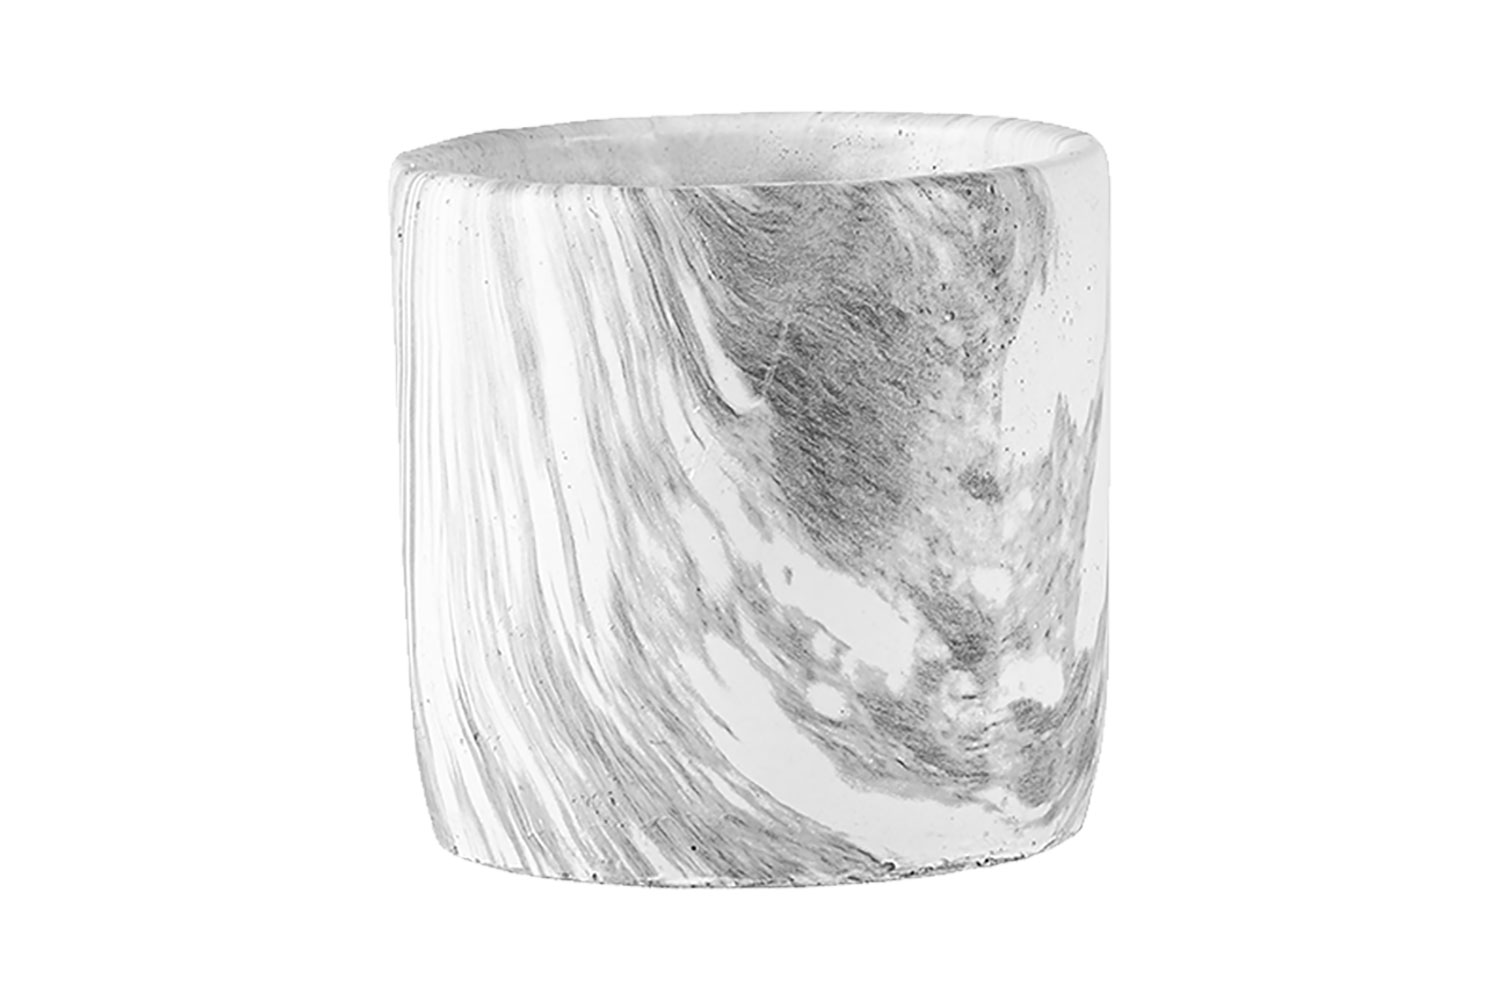 Marble-grained cement jars